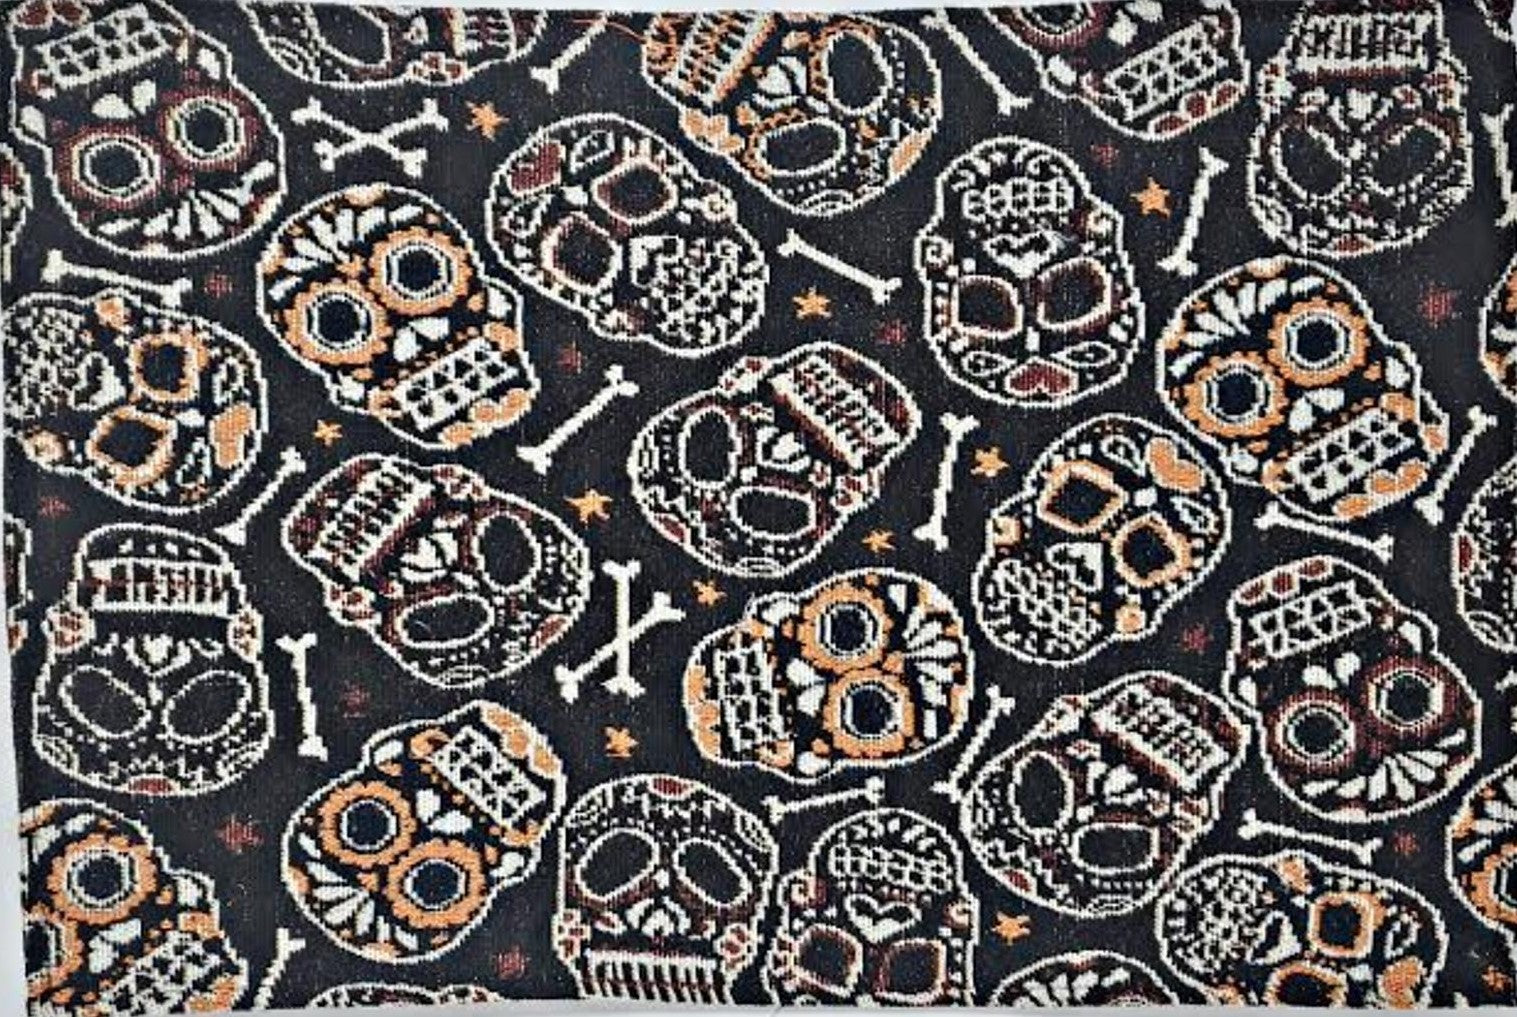 Halloween Skull and Bones Day of the Dead Tapestry Place Mats 13 in x 19 in – Set of 4